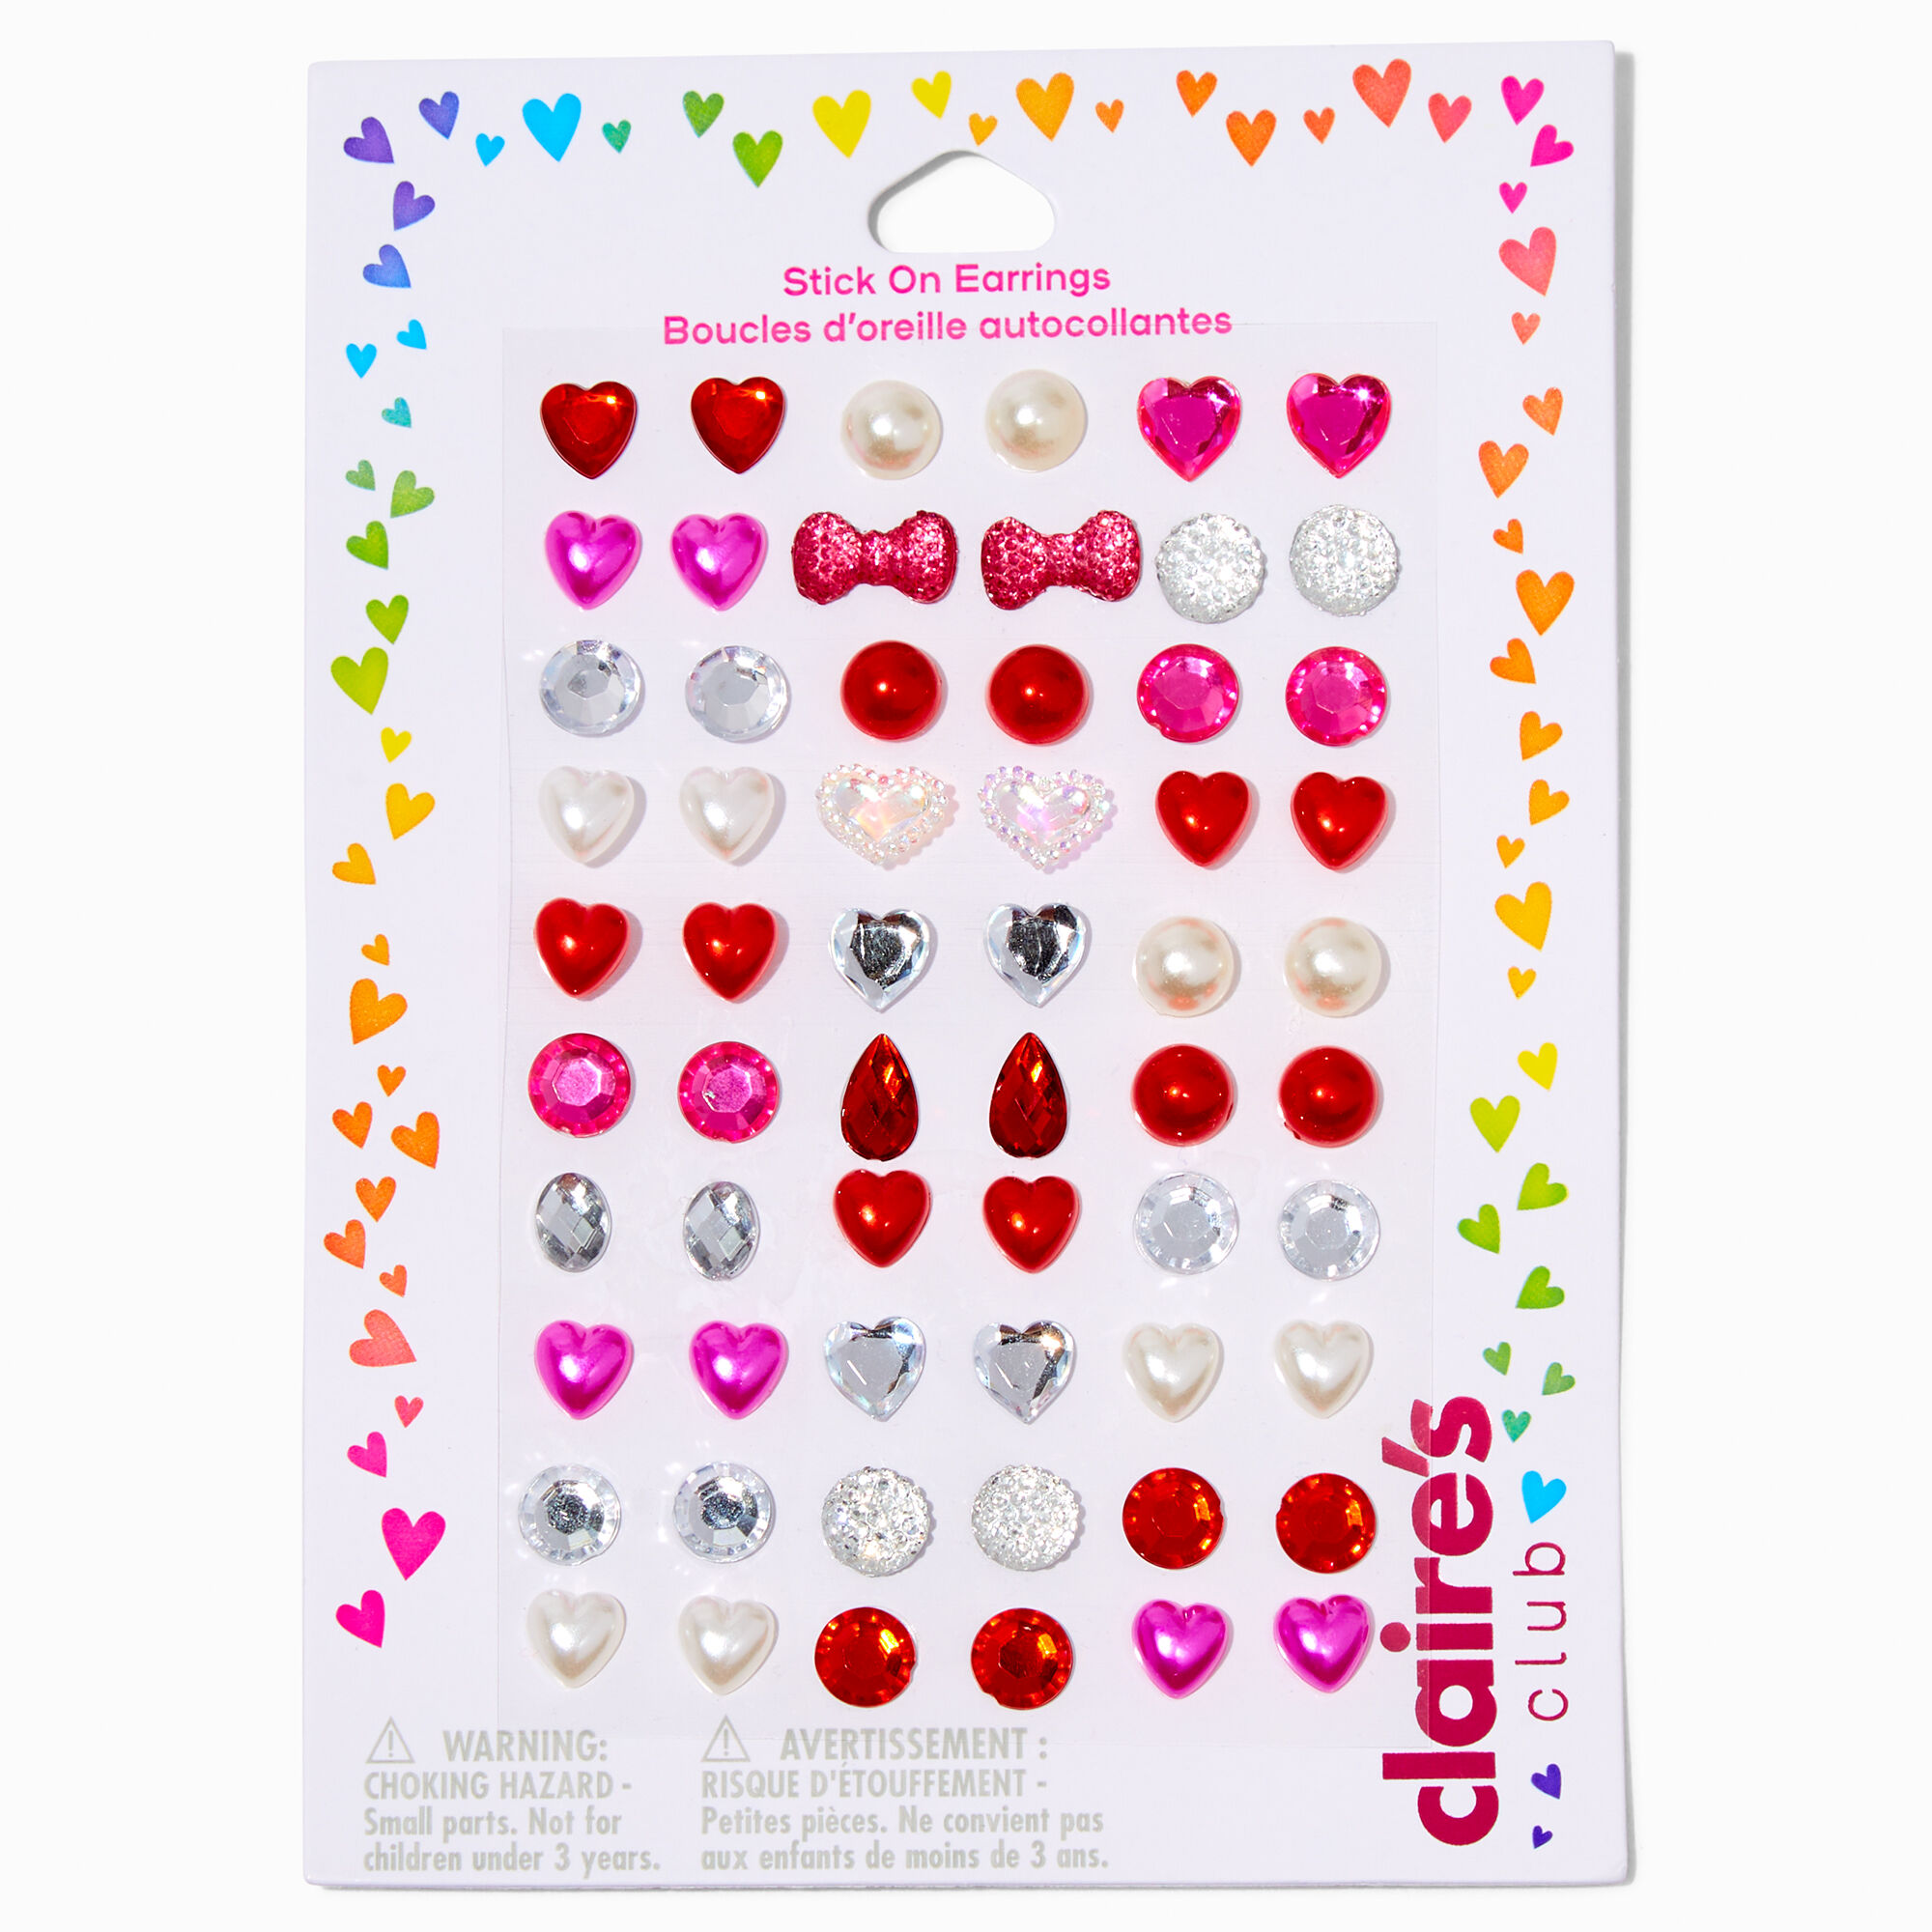 View Claires Club Holiday Stick On Earrings 30 Pack information